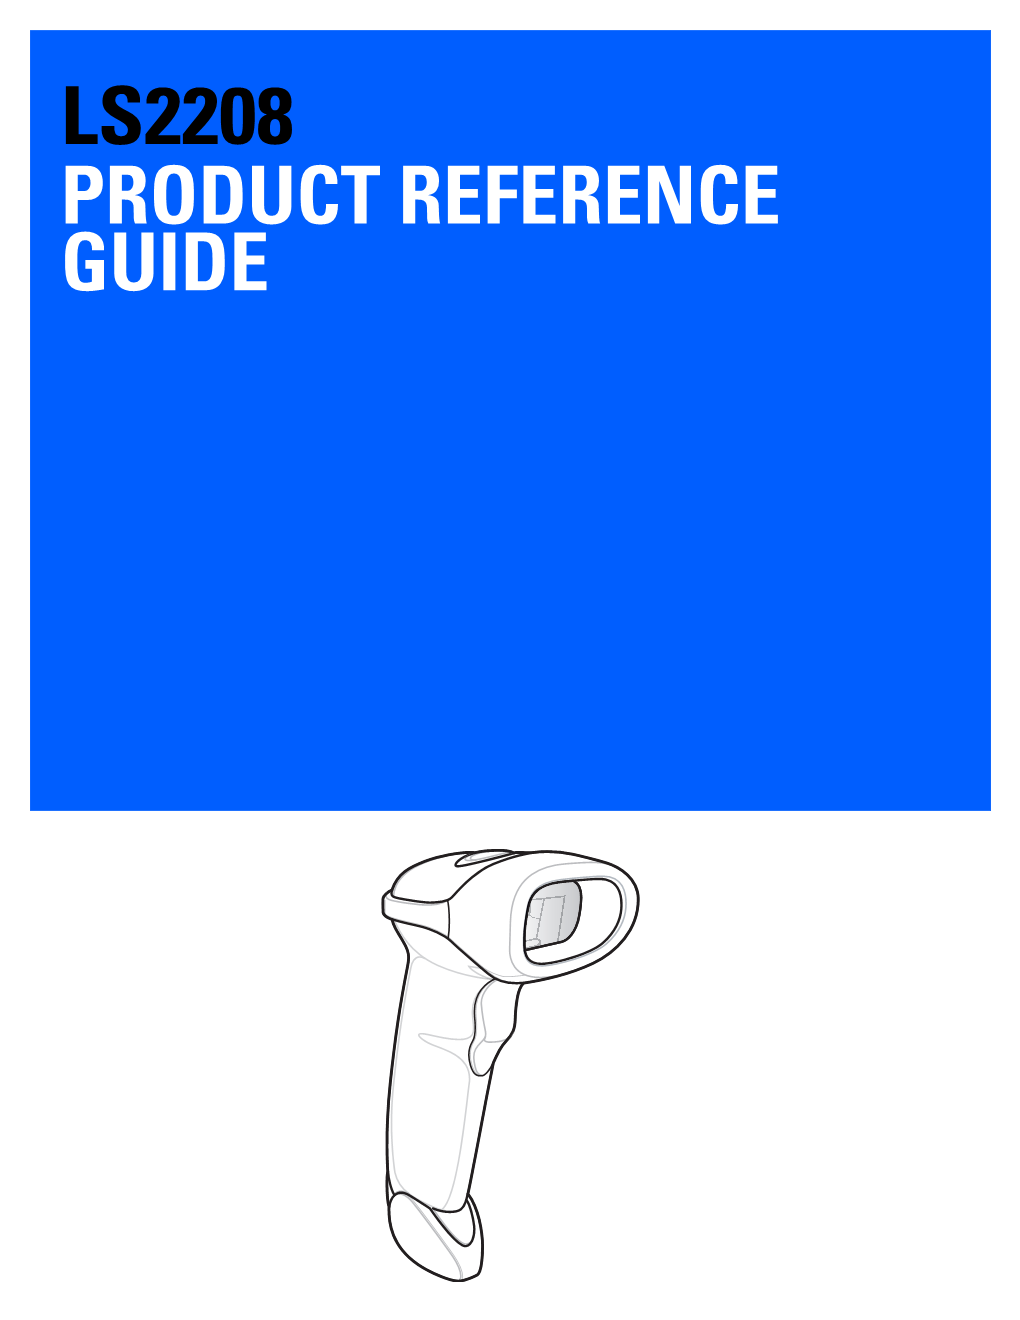 LS2208 Product Reference Guide, P/N MN000754A02 Rev A